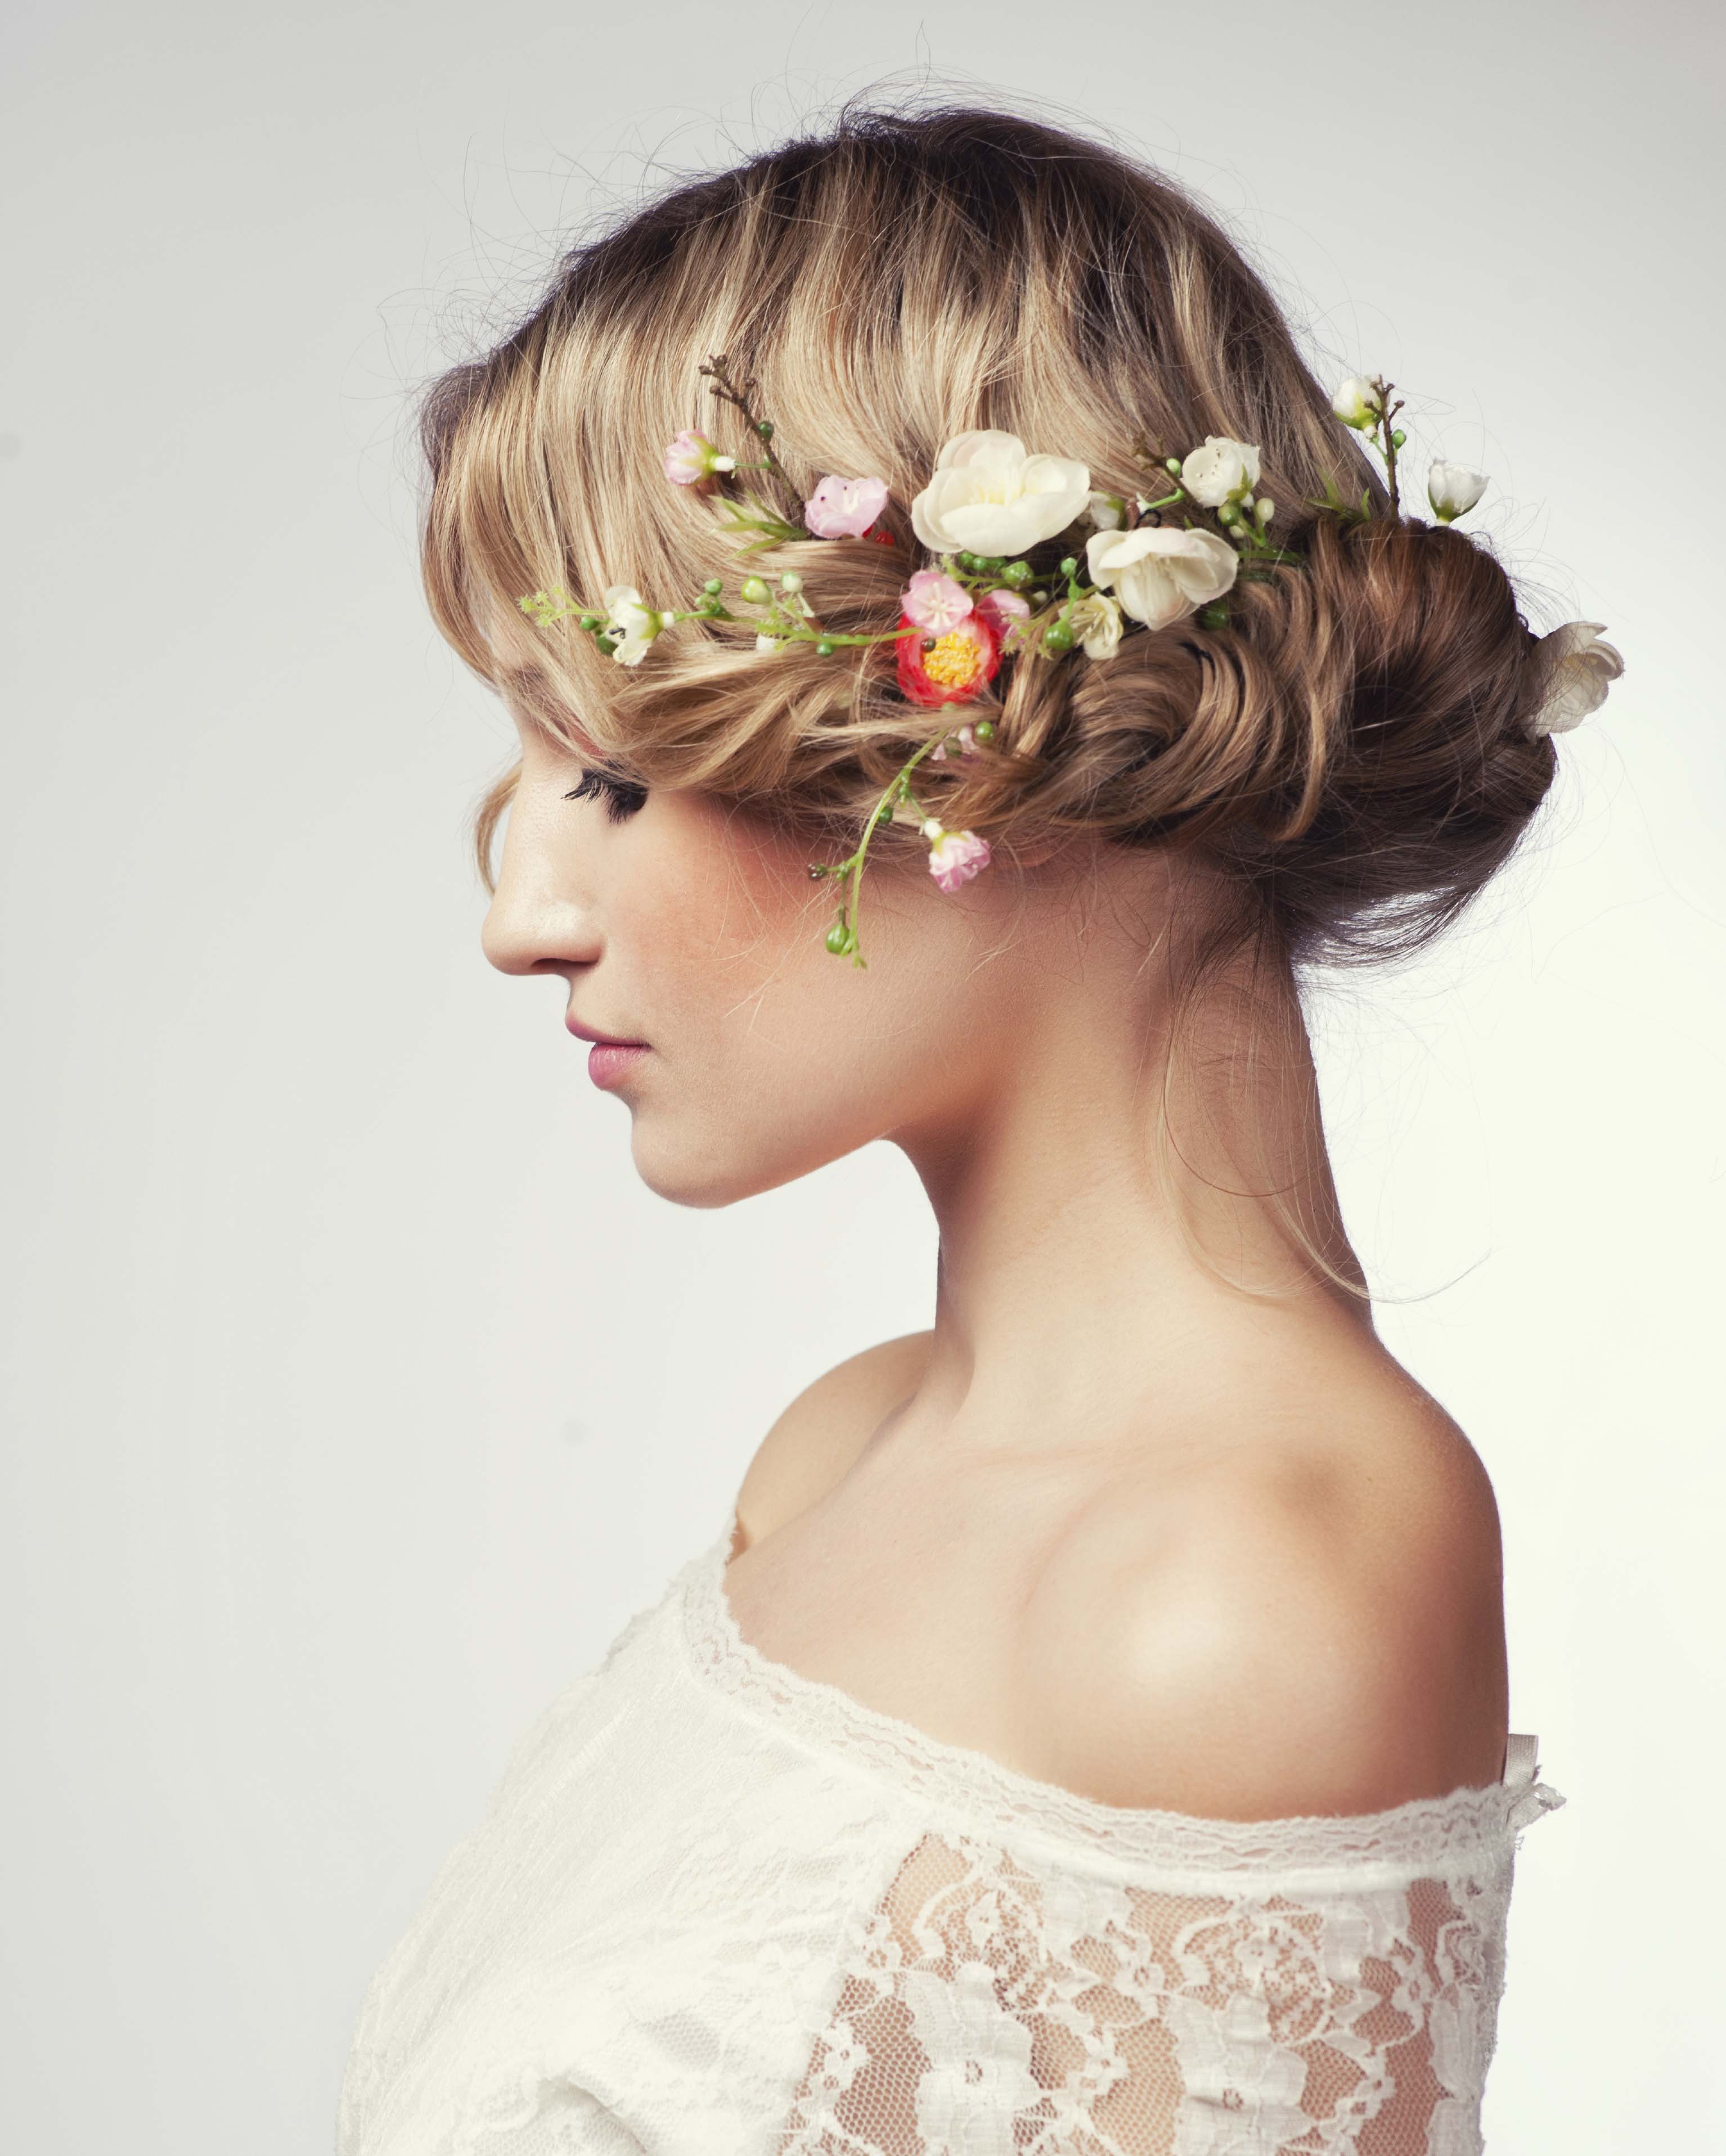 50 Wedding Hairstyles for All Hair Types - Zola Expert Wedding Advice